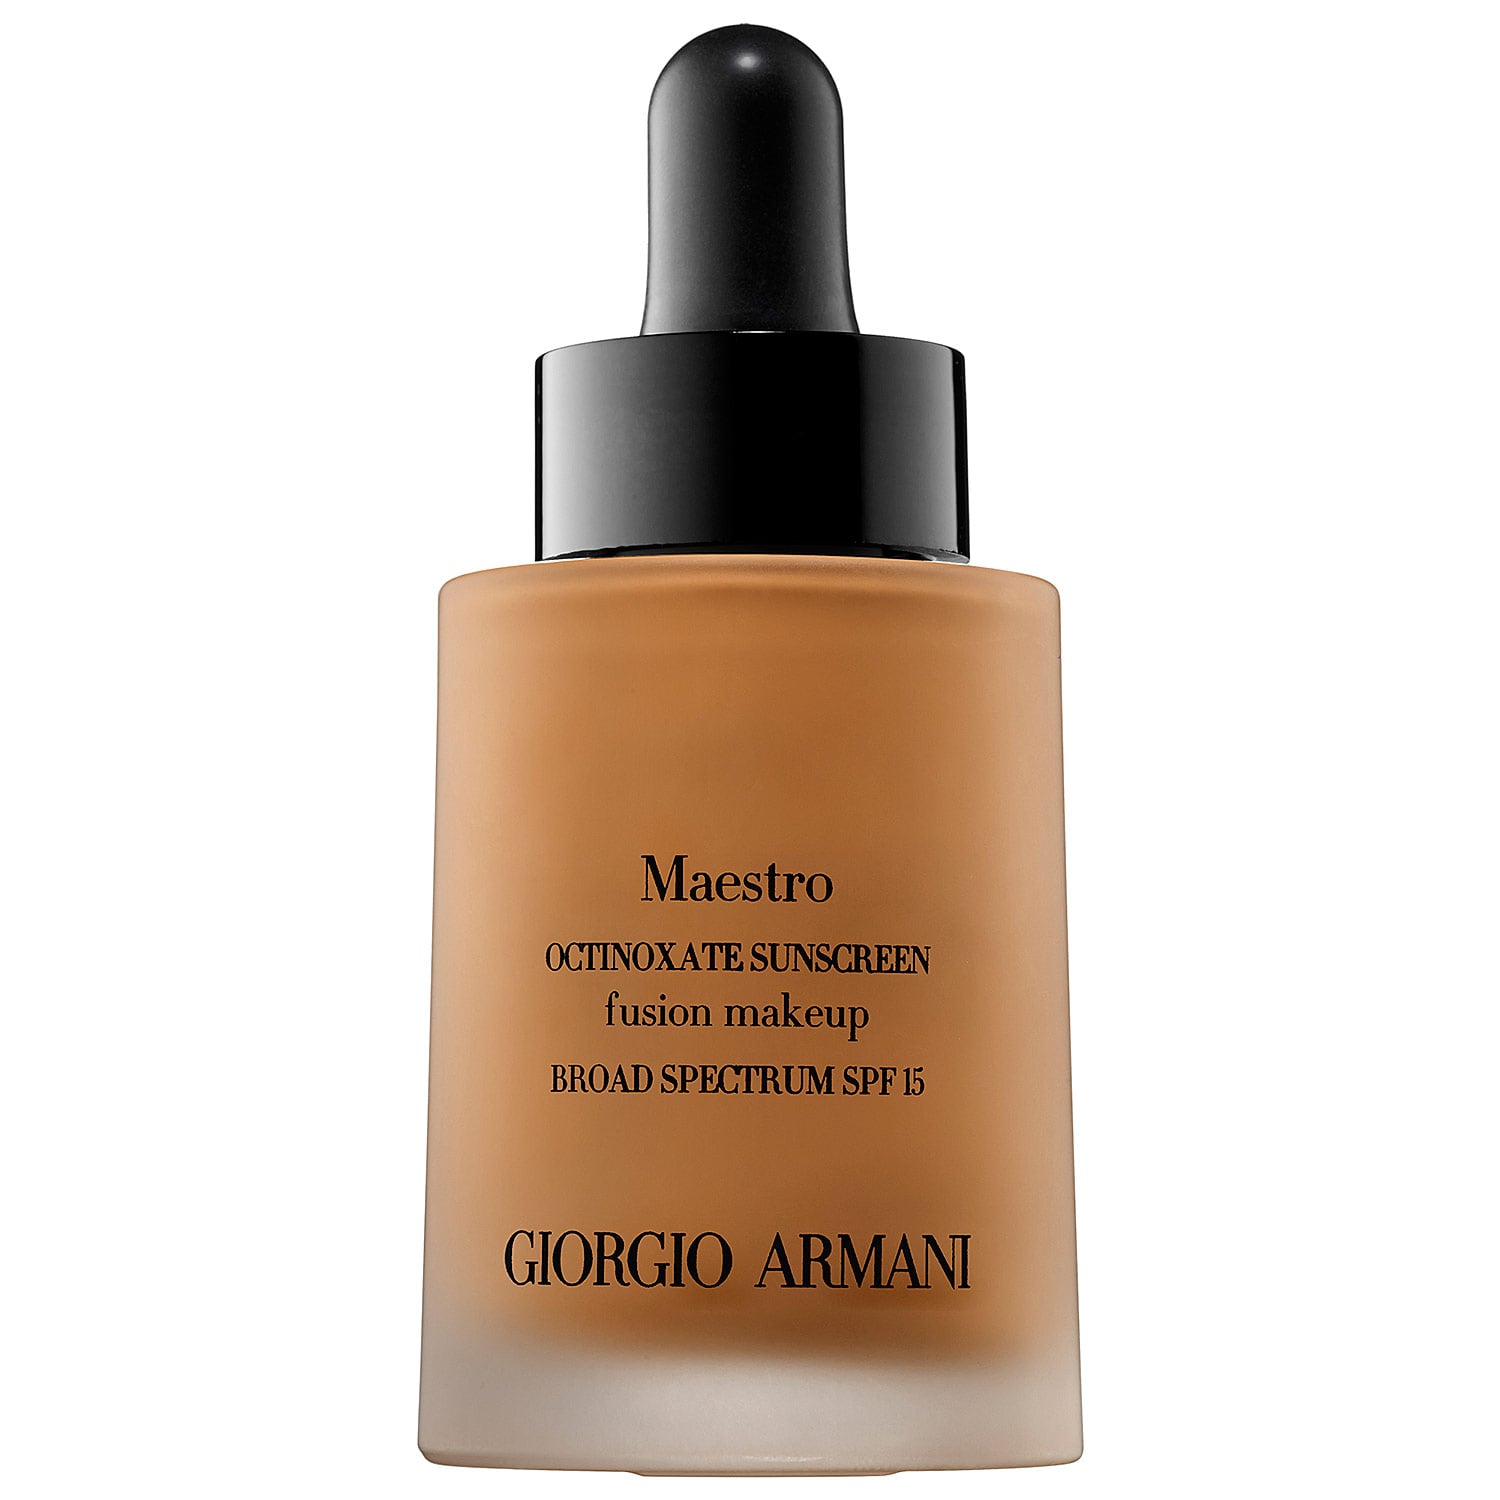 Giorgio Armani Maestro Foundation | Mindy Kaling's Favorite Beauty Products  Are as Obsession-Worthy as She Is | POPSUGAR Beauty Photo 2